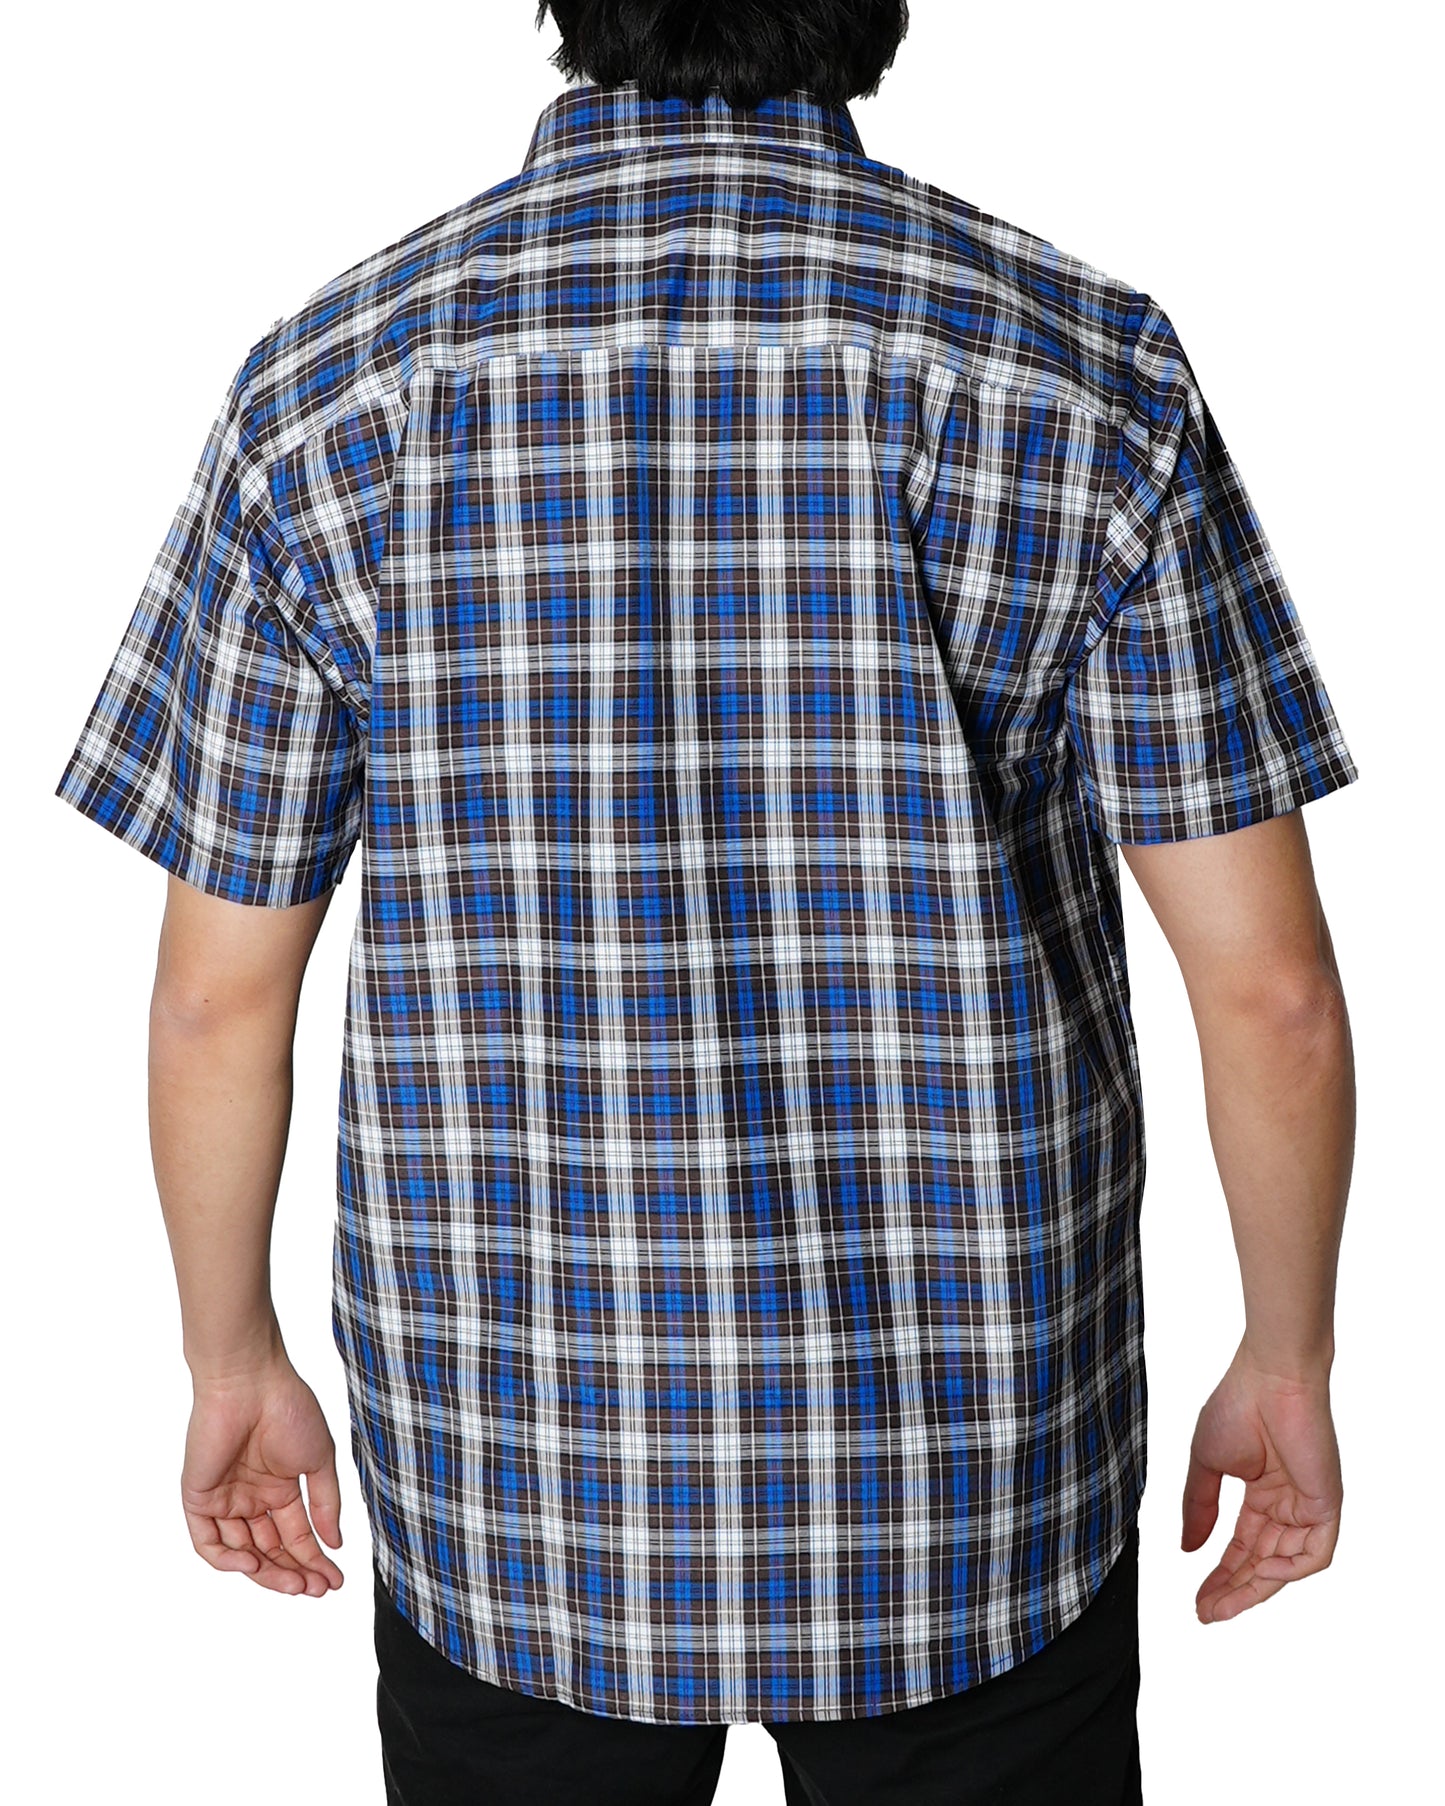 Brown, Blue and White Short Sleeve Regular Fit Shirt (2282)